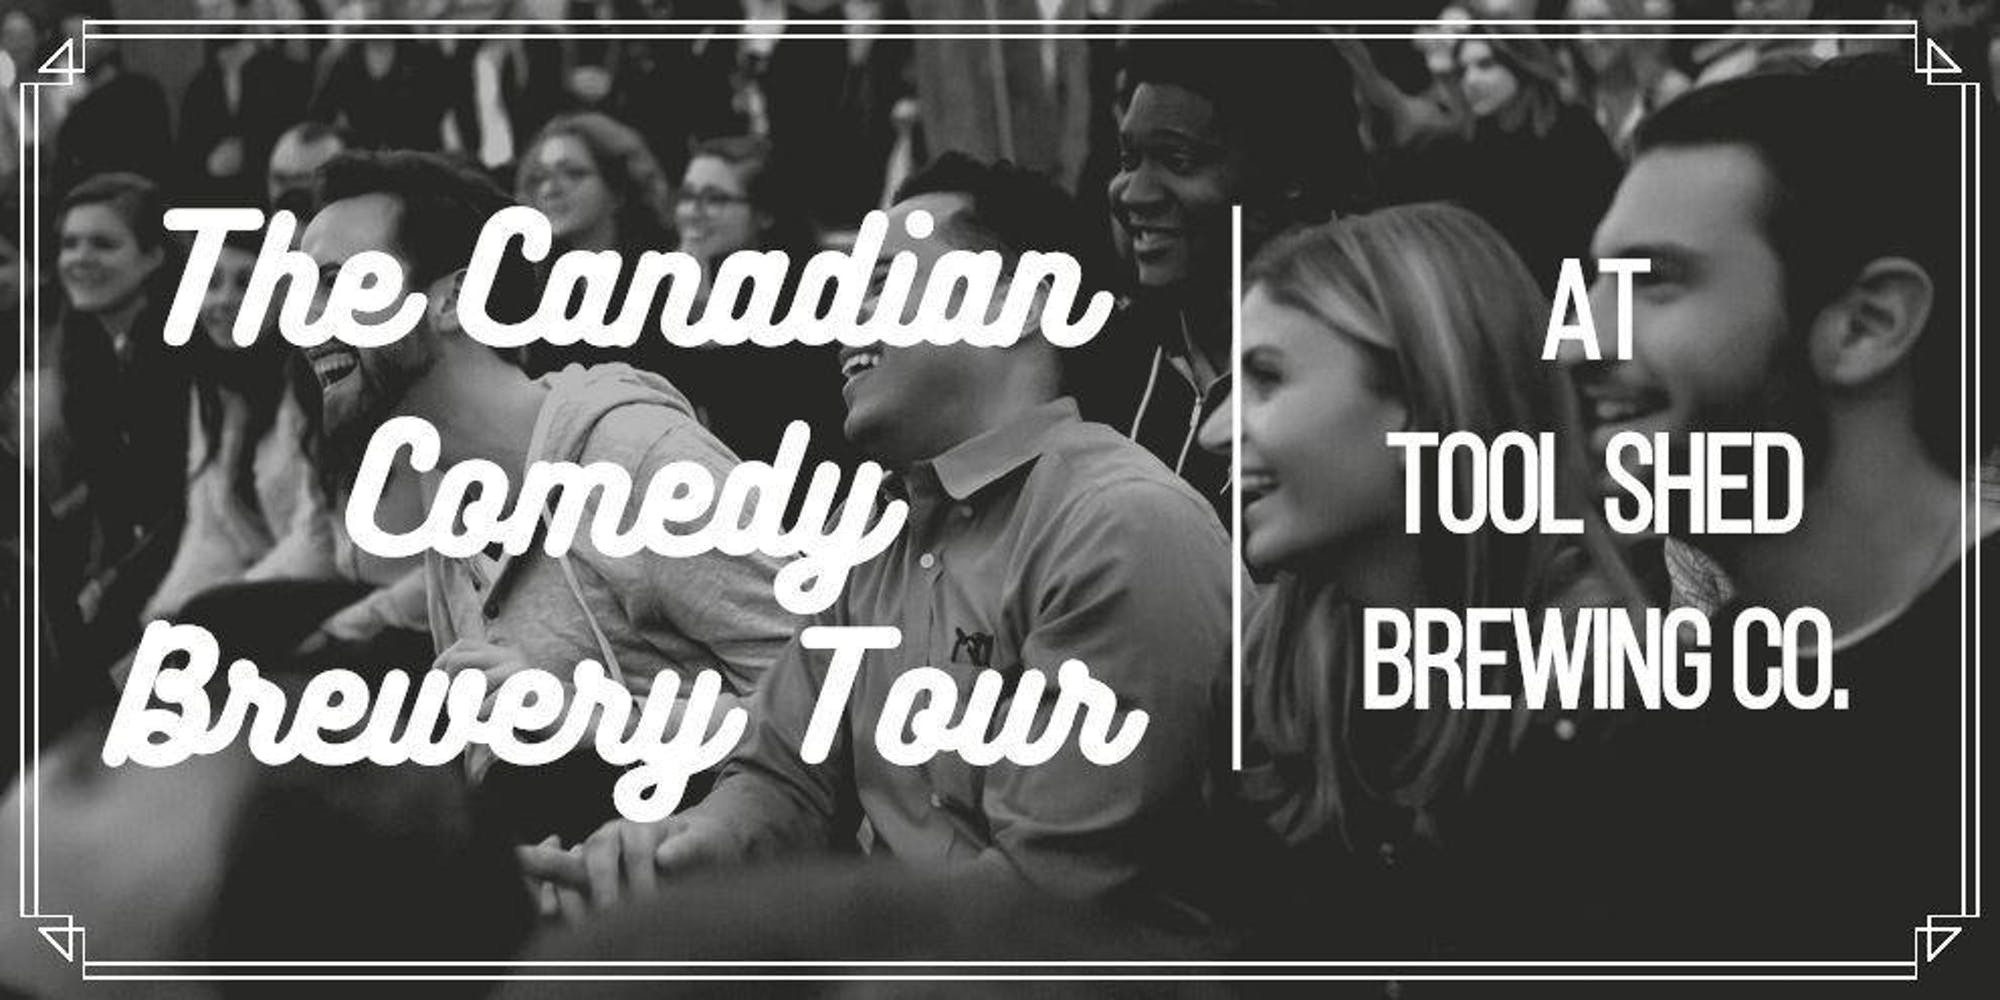 The Canadian Comedy Brewery Tour @ Tool Shed Brewing Co. 